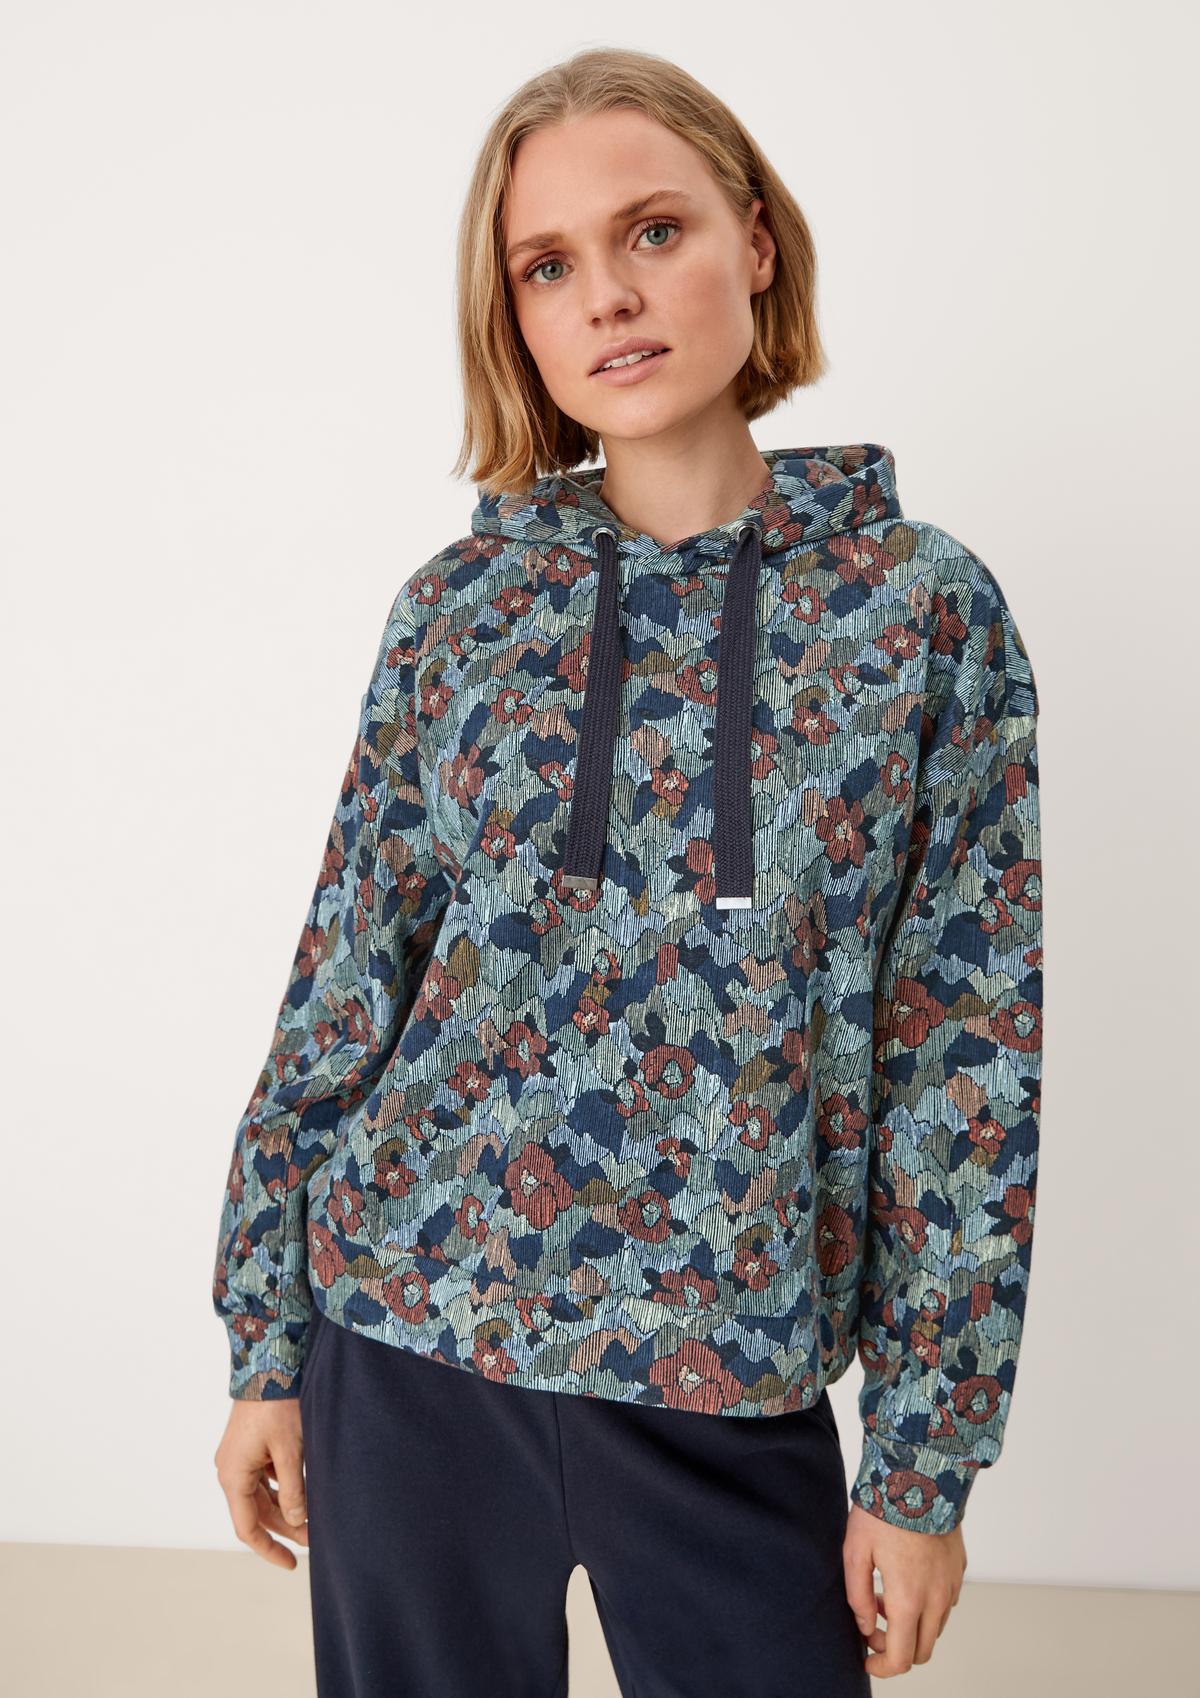 s.Oliver Hooded sweatshirt with an all-over print